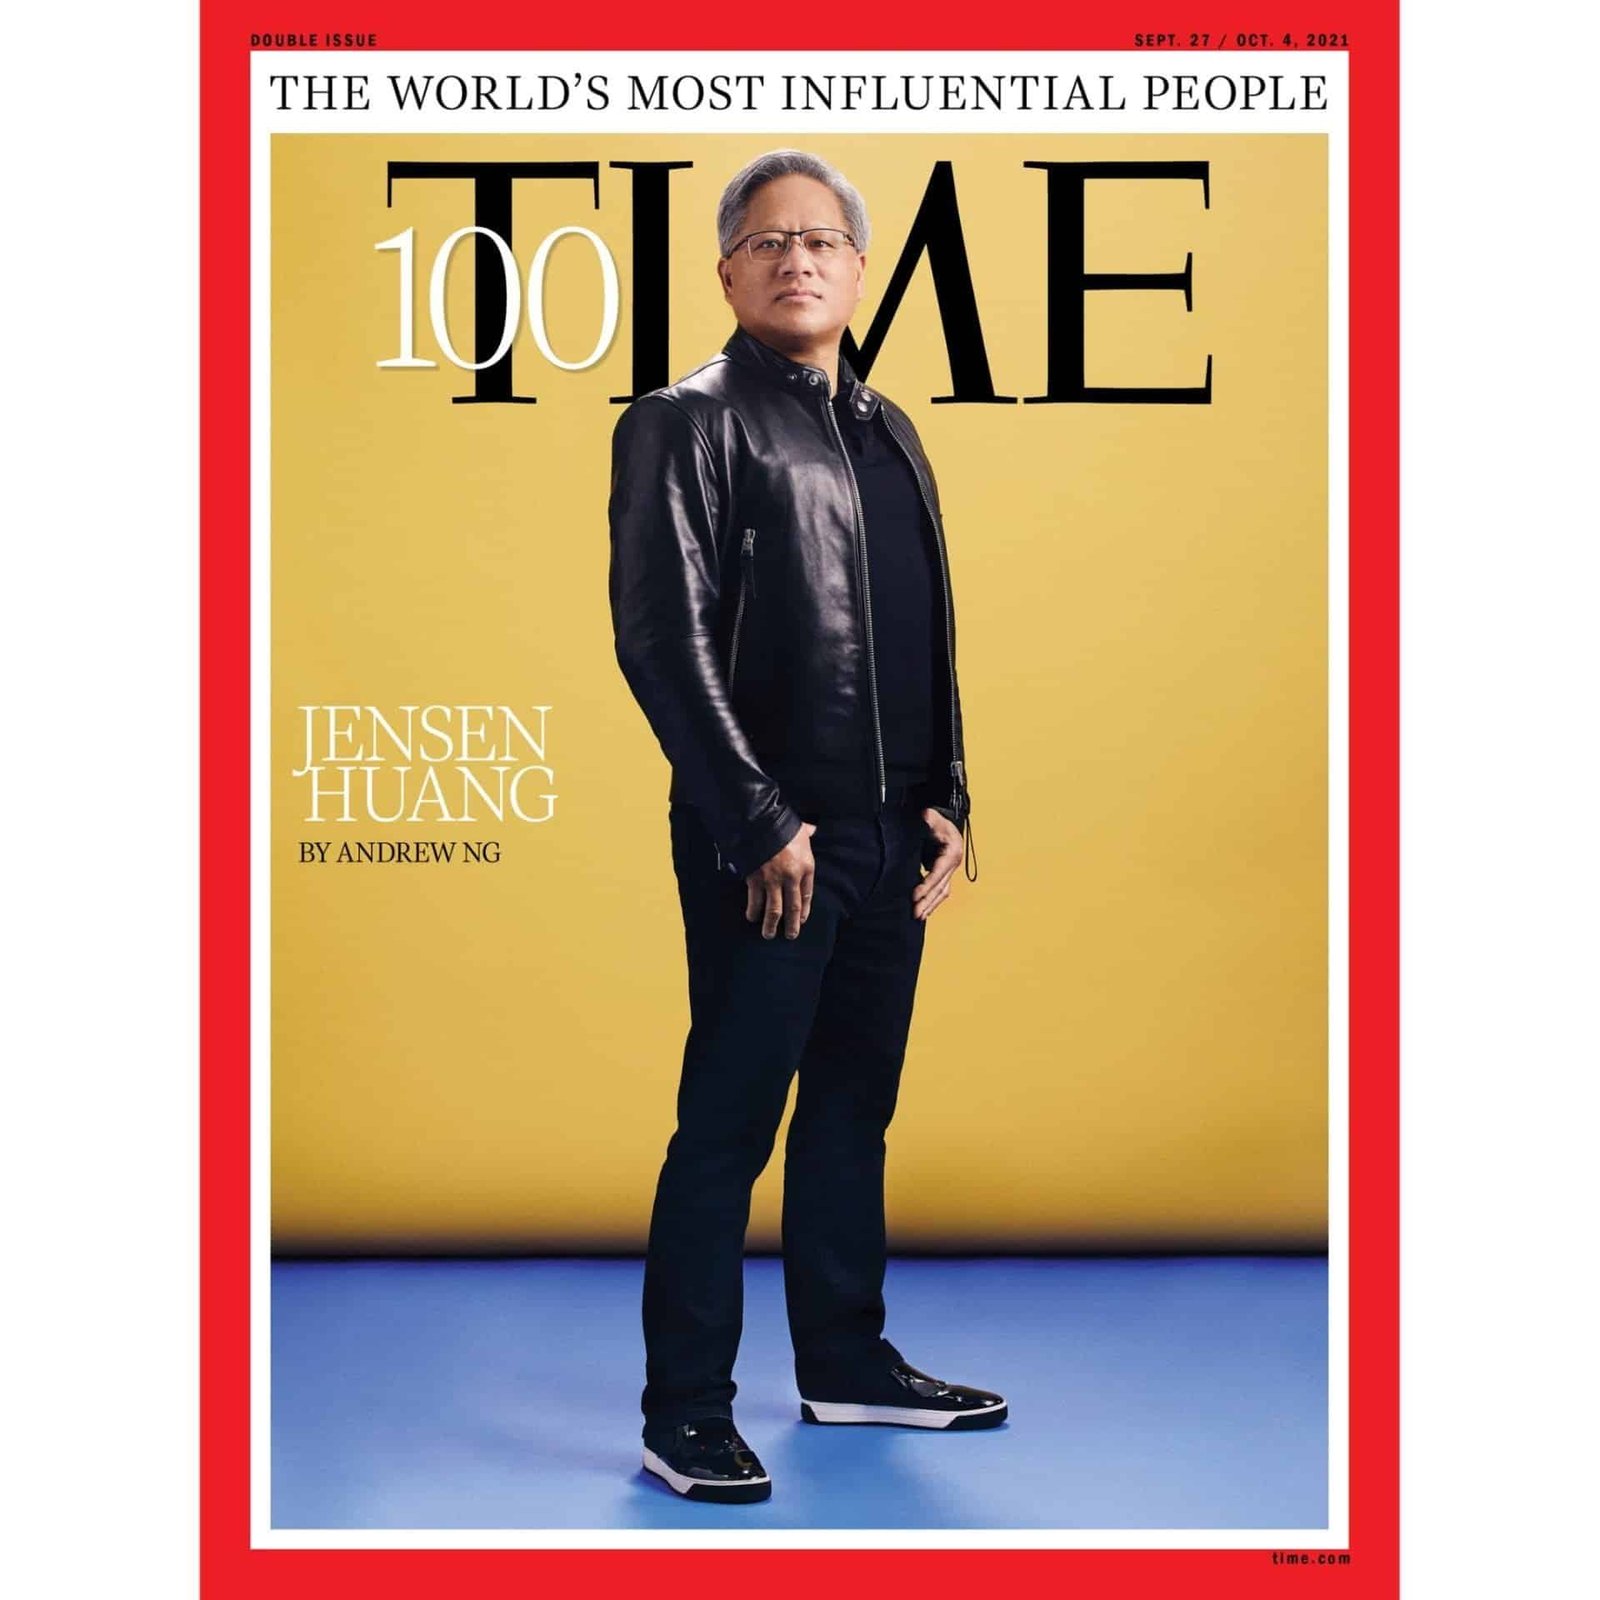 Nvidia CEO Jensen Huang is on Time's 100 Most Influential People List